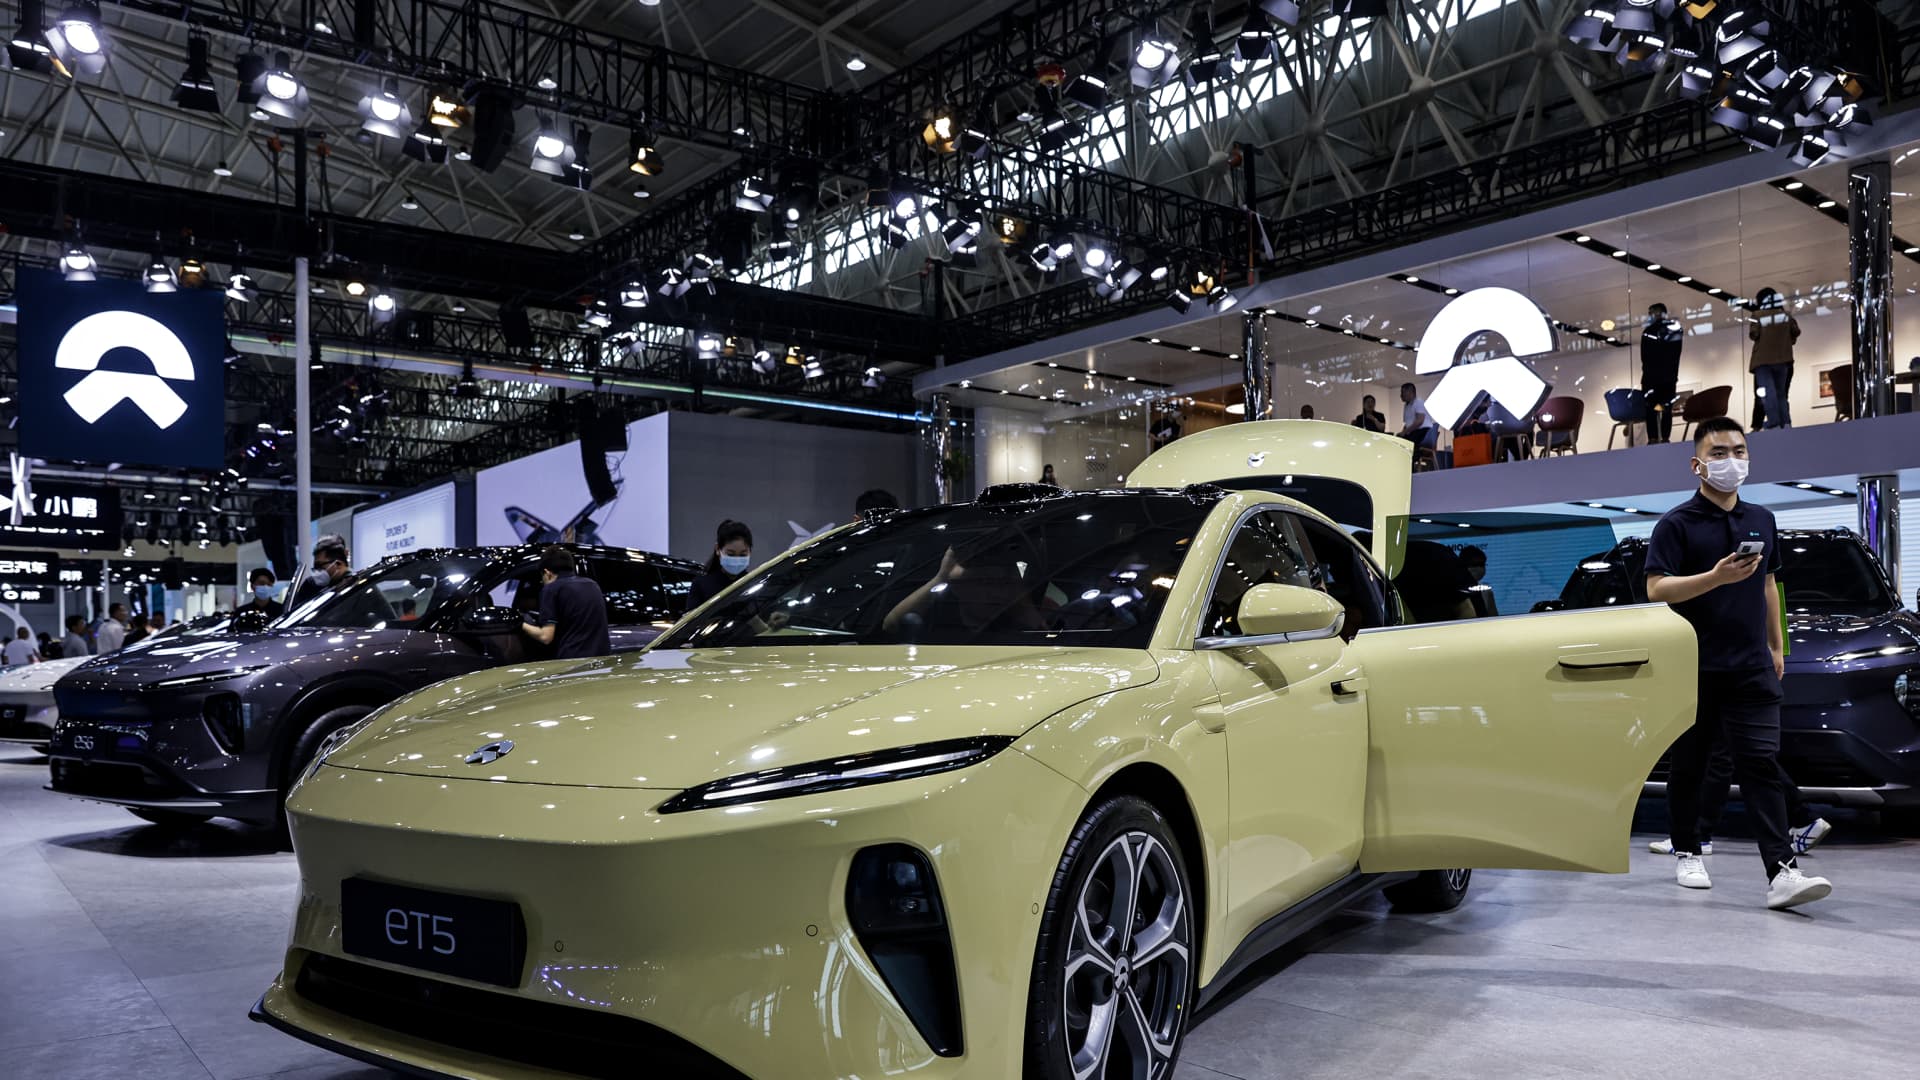 Nio reports wider second-quarter loss amid China slowdown and product line revamp